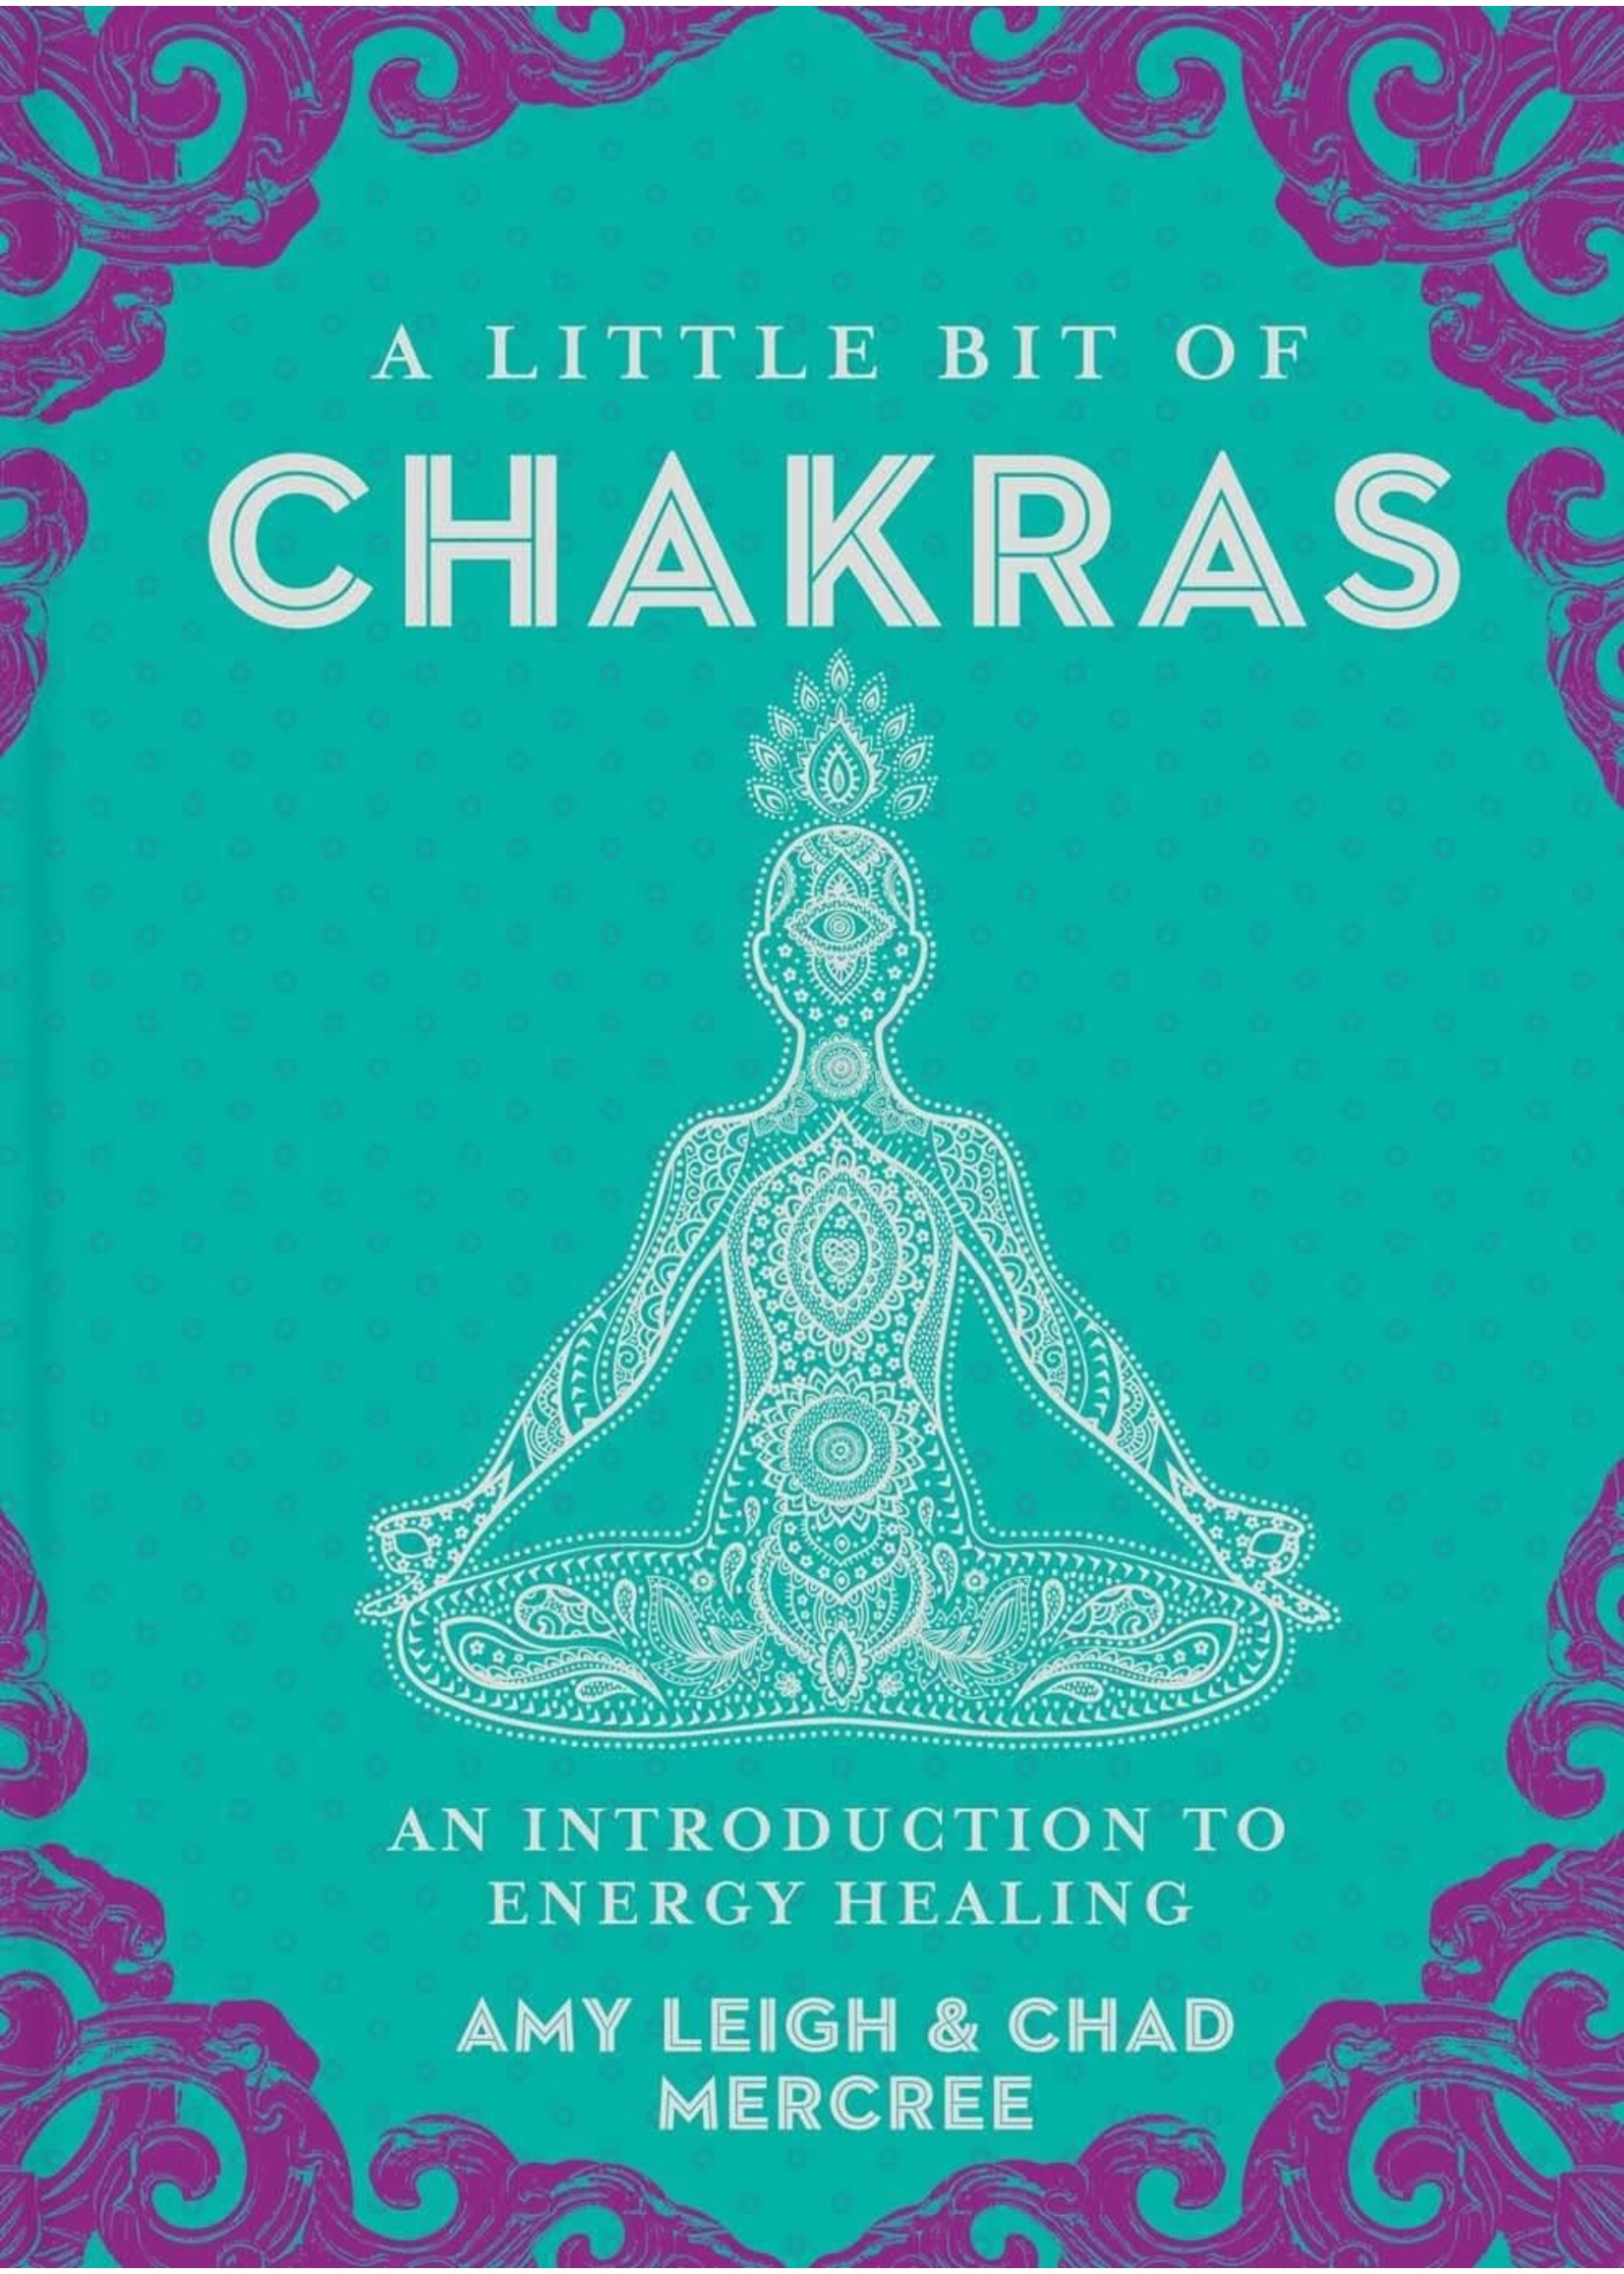 A Little Bit of Chakras- An Intorduction to Energy Healing